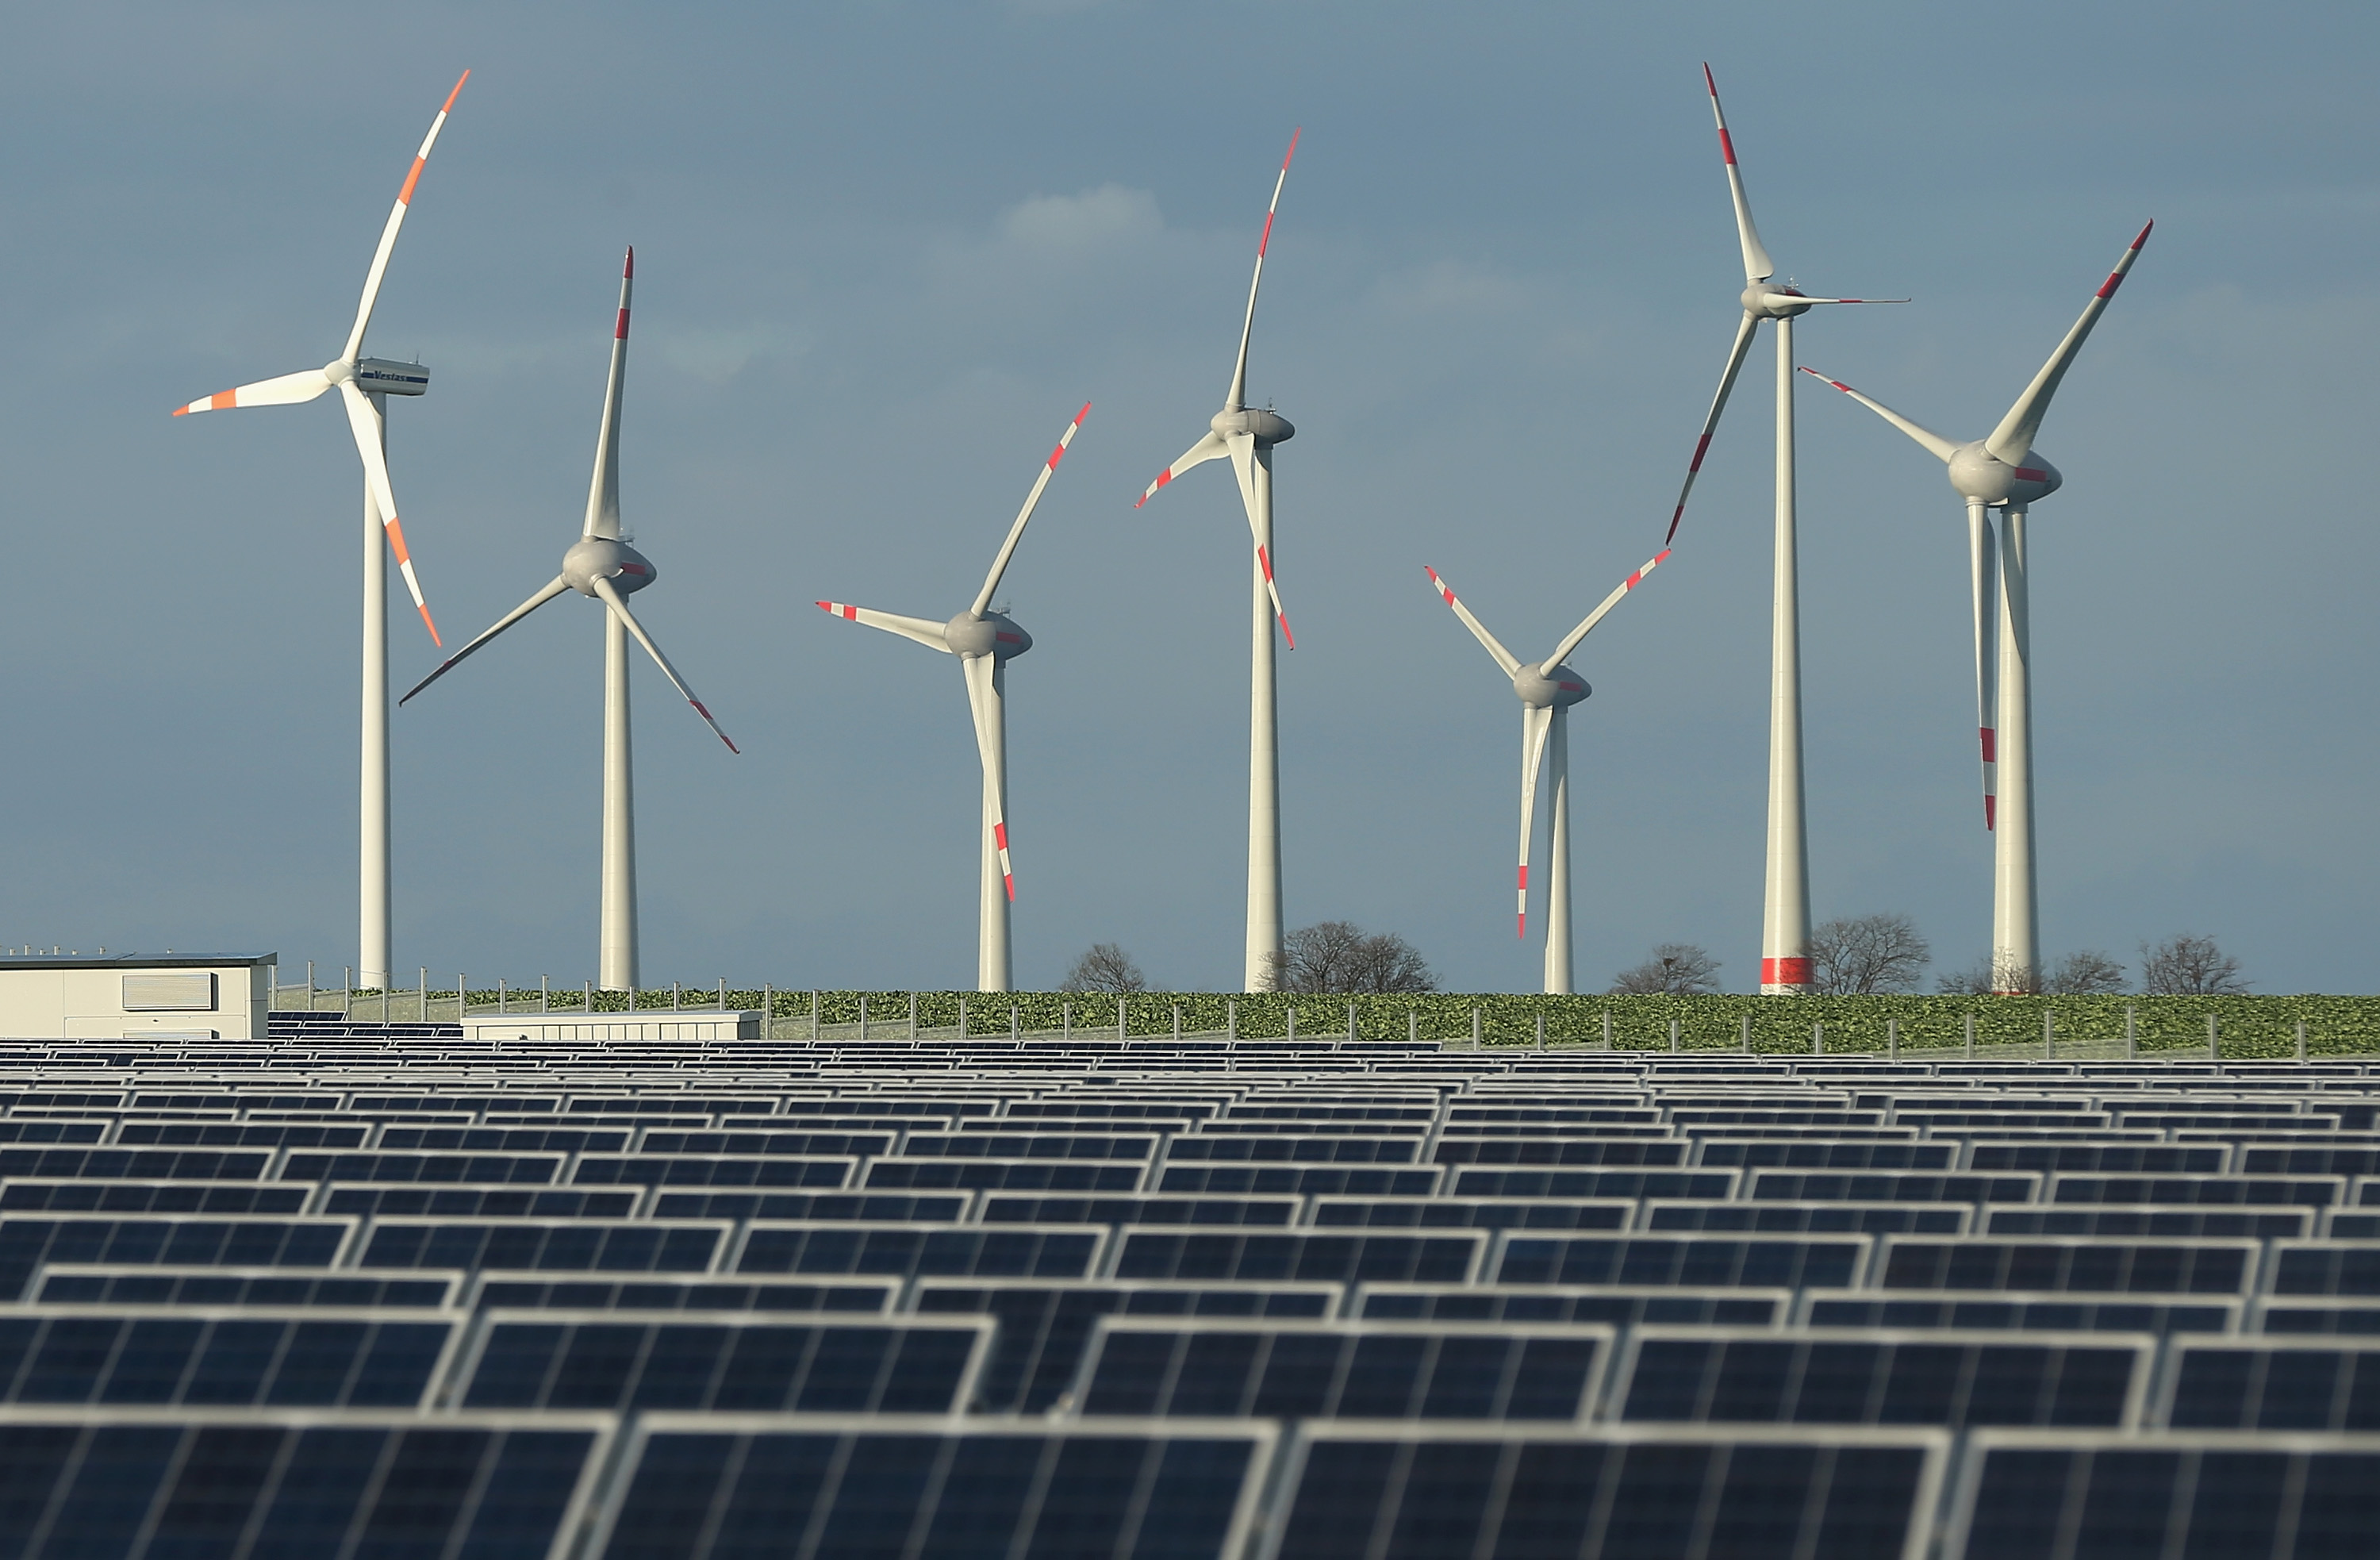 Wind turbines stand behind a solar power park on October 30, 2013 near Werder, Germany. (Sean Gallup—Getty Images)